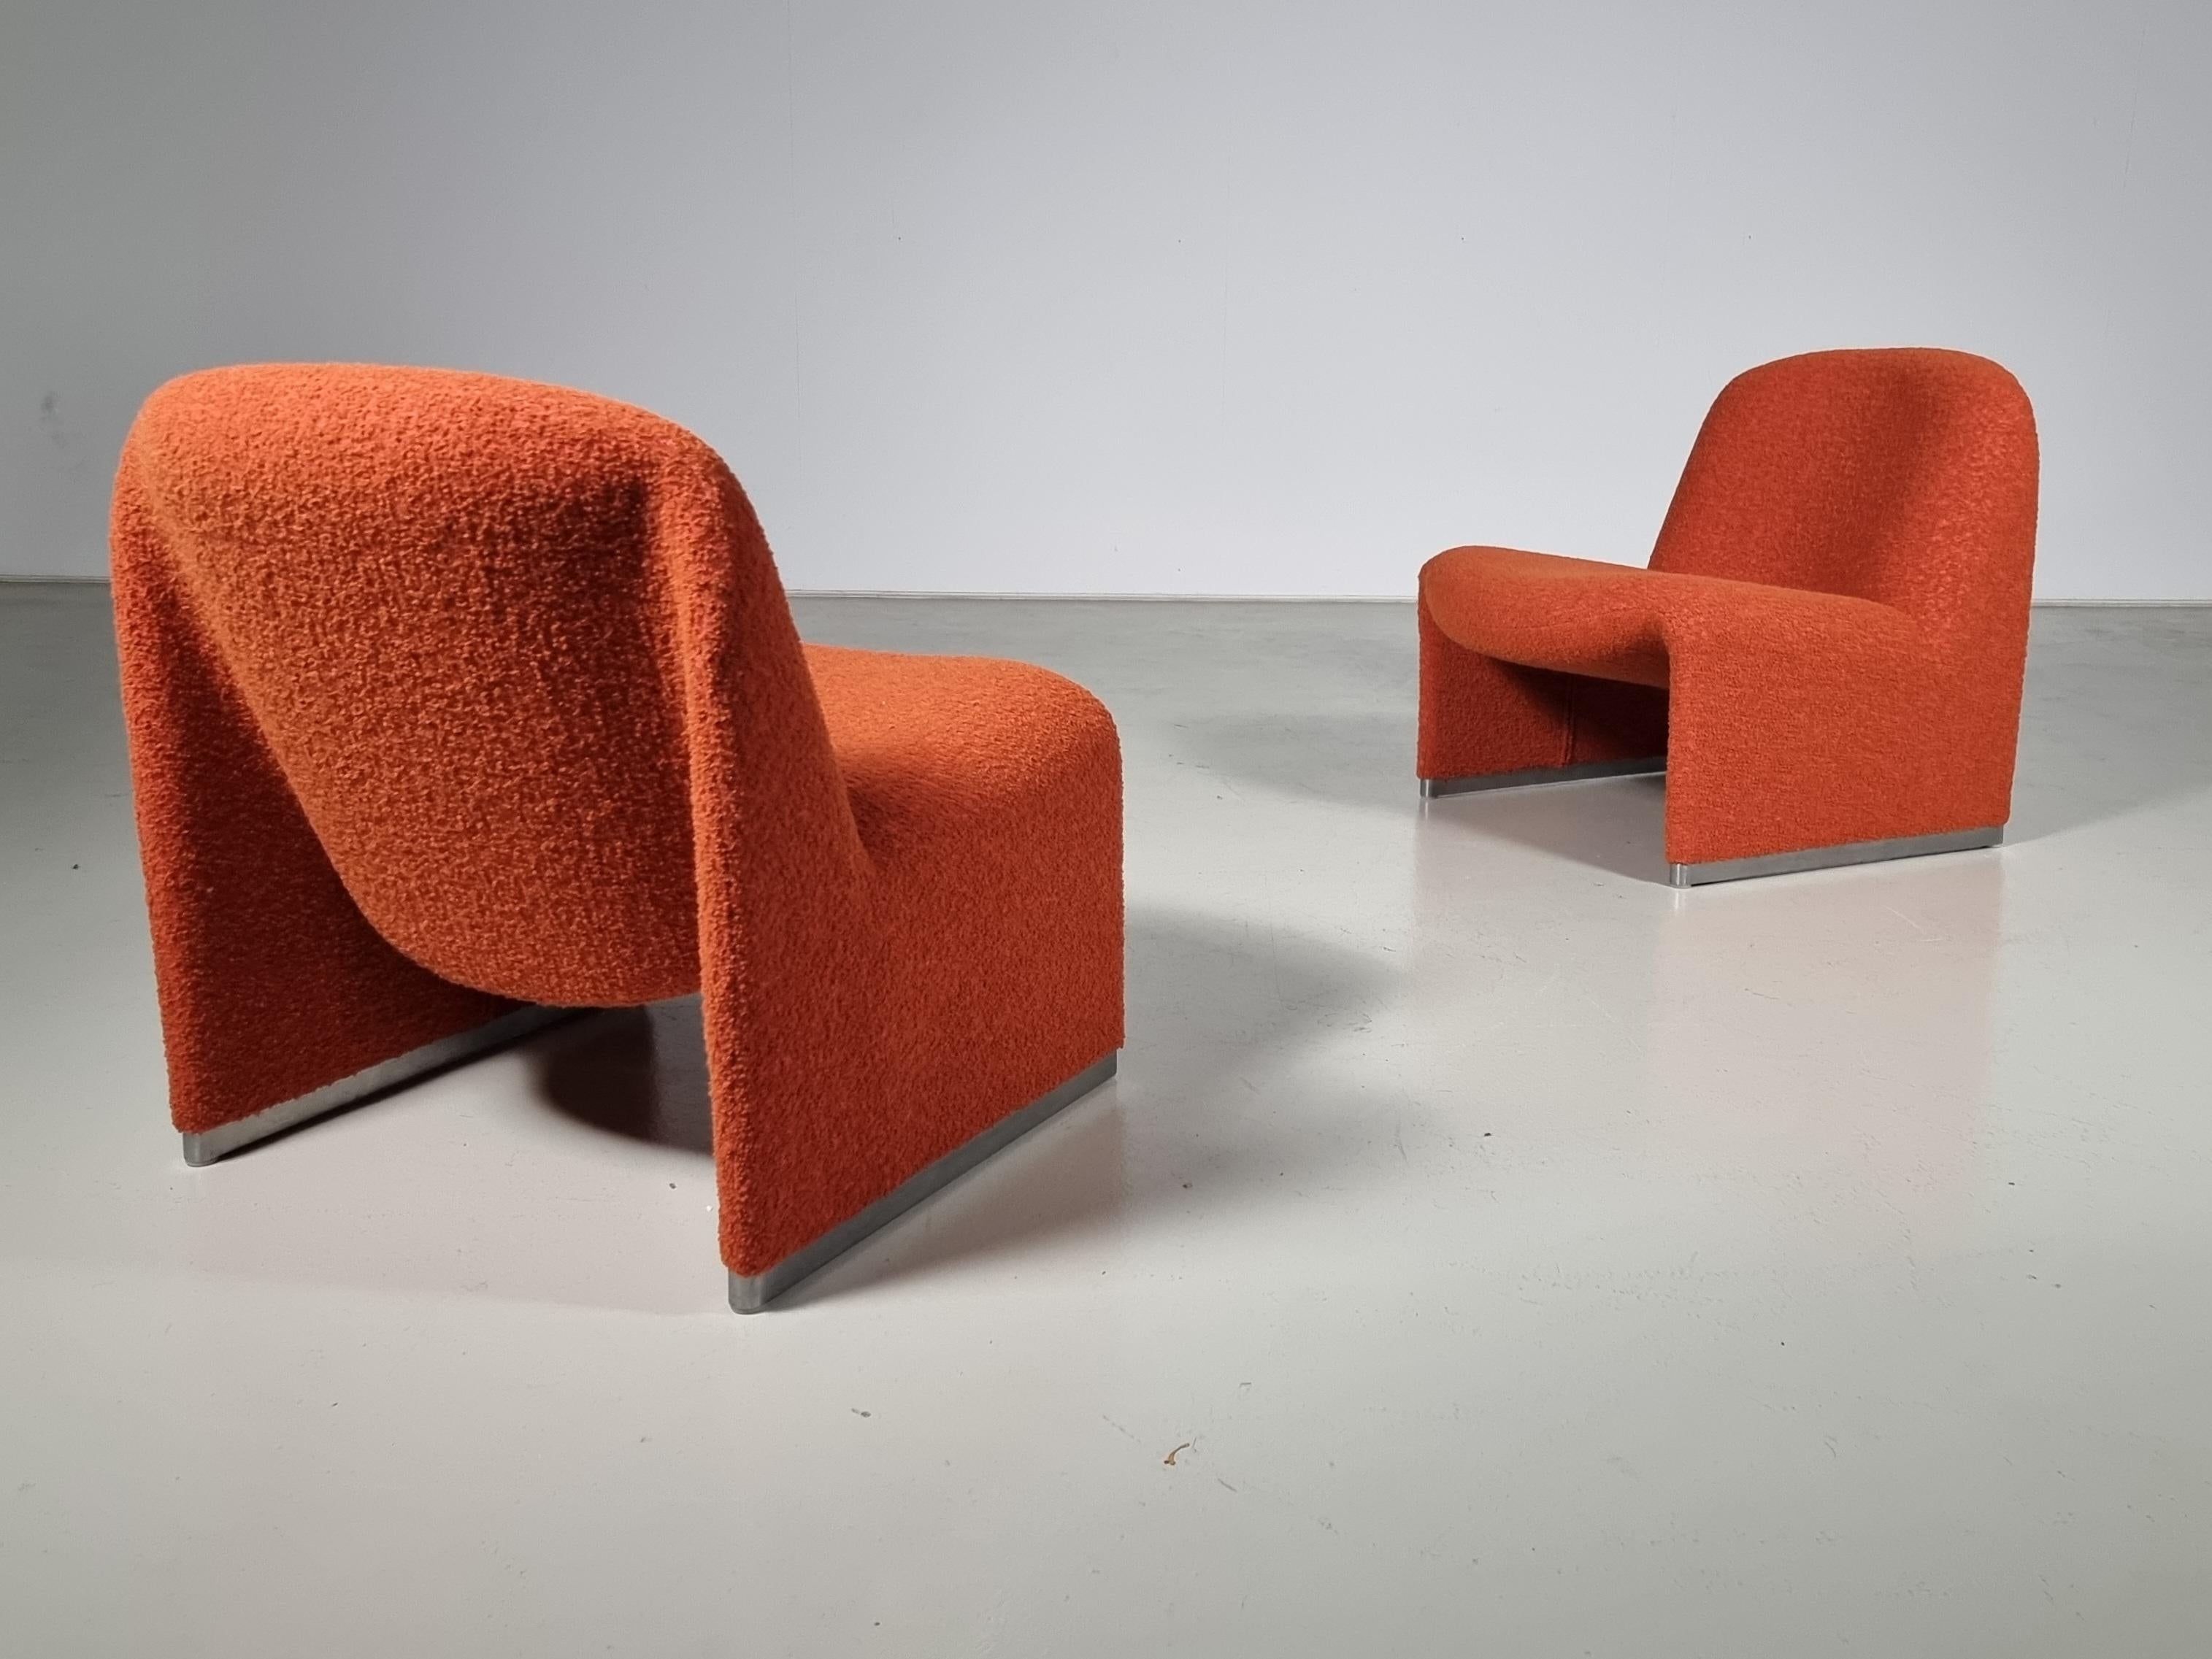 Italian Set of 2 Alky Chairs in orange/red boucle, Giancarlo Piretti for Castelli, 1970